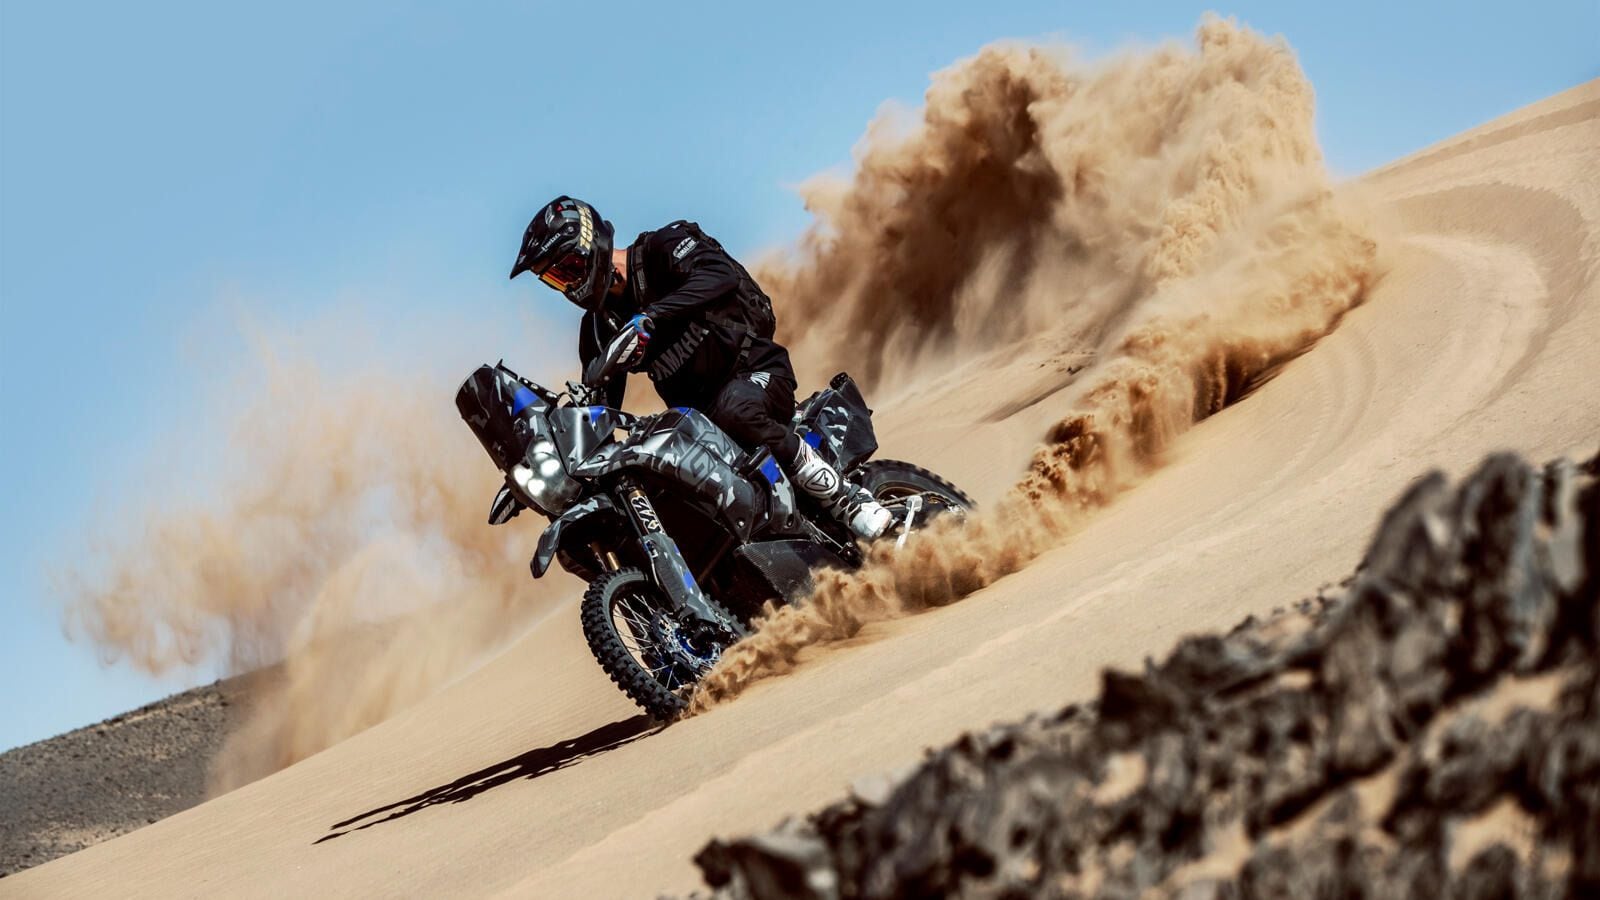 Perhaps we will see Yamaha’s Ténéré 700 Rally Raid Prototype in competition soon.